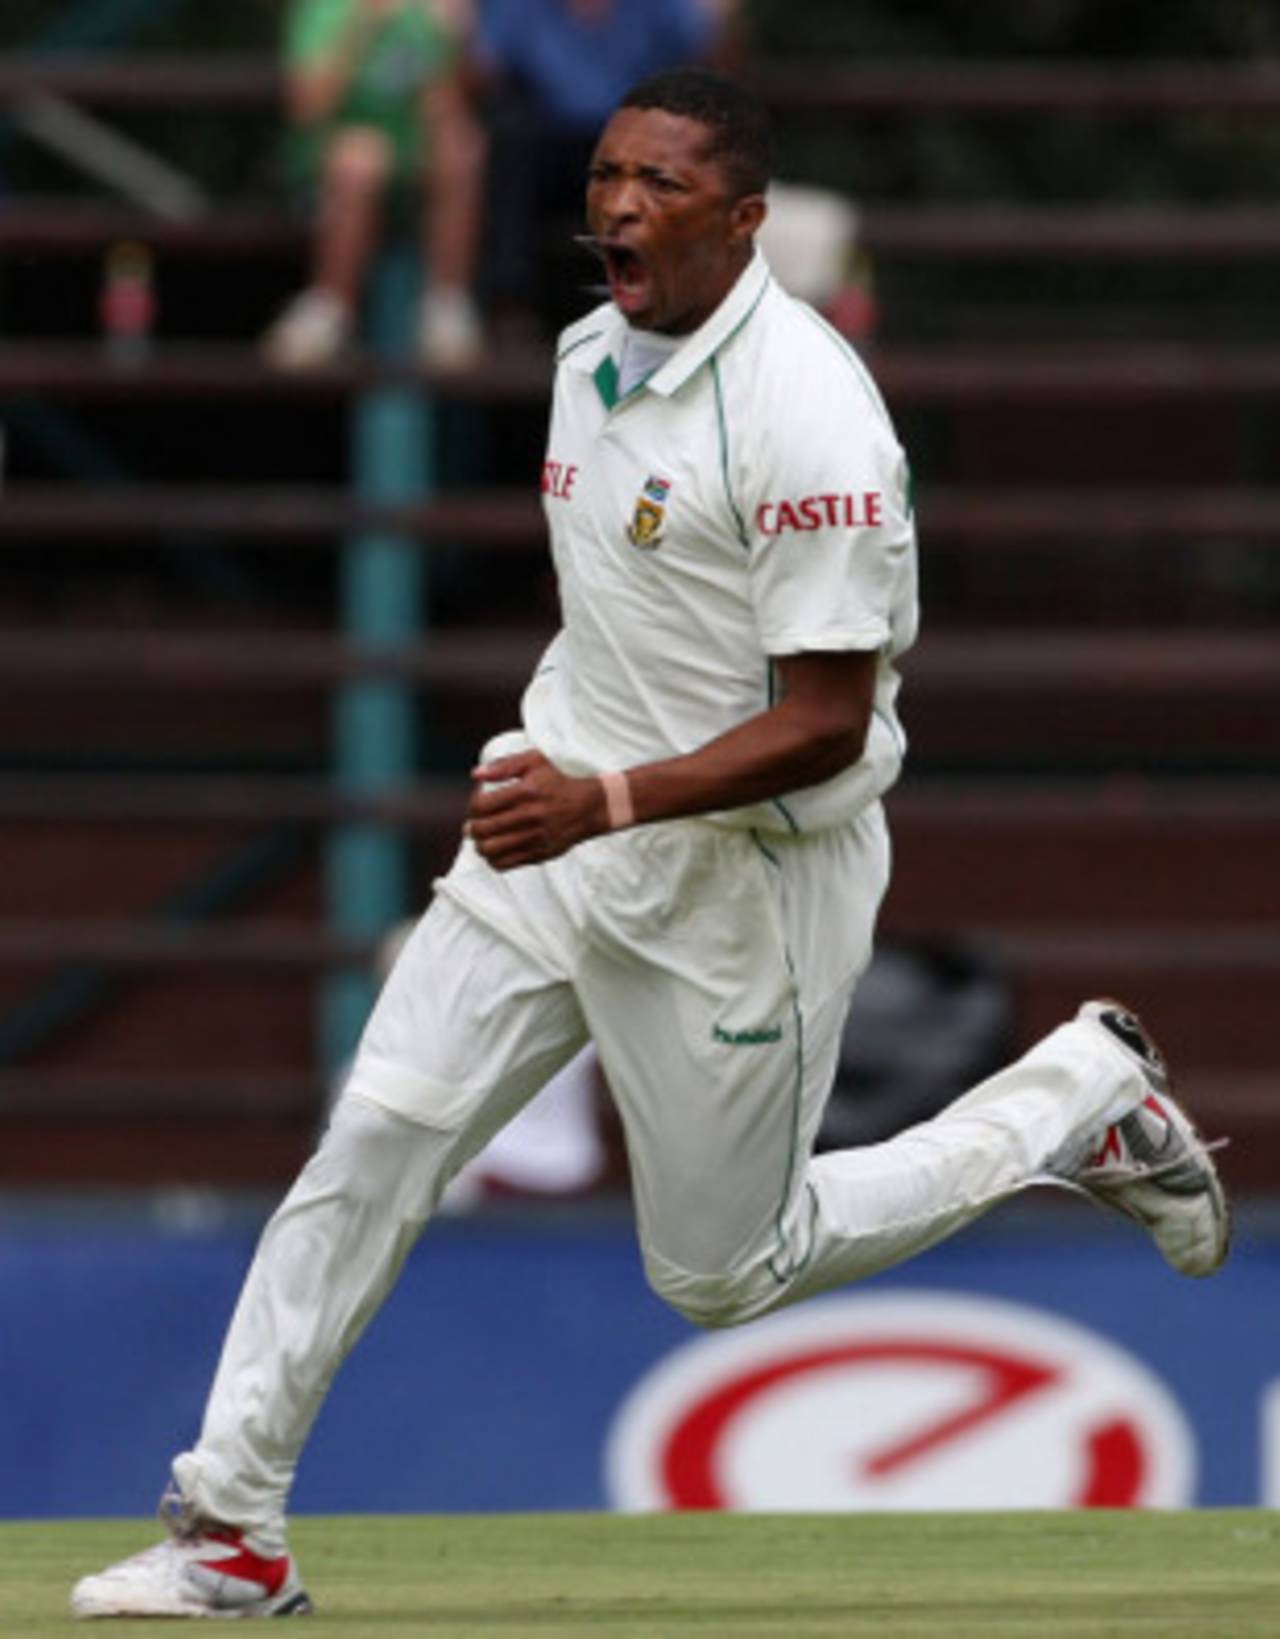 Makhaya Ntini, the former South Africa fast bowler, is likely to be the frontrunner for the selection panel position&nbsp;&nbsp;&bull;&nbsp;&nbsp;Getty Images